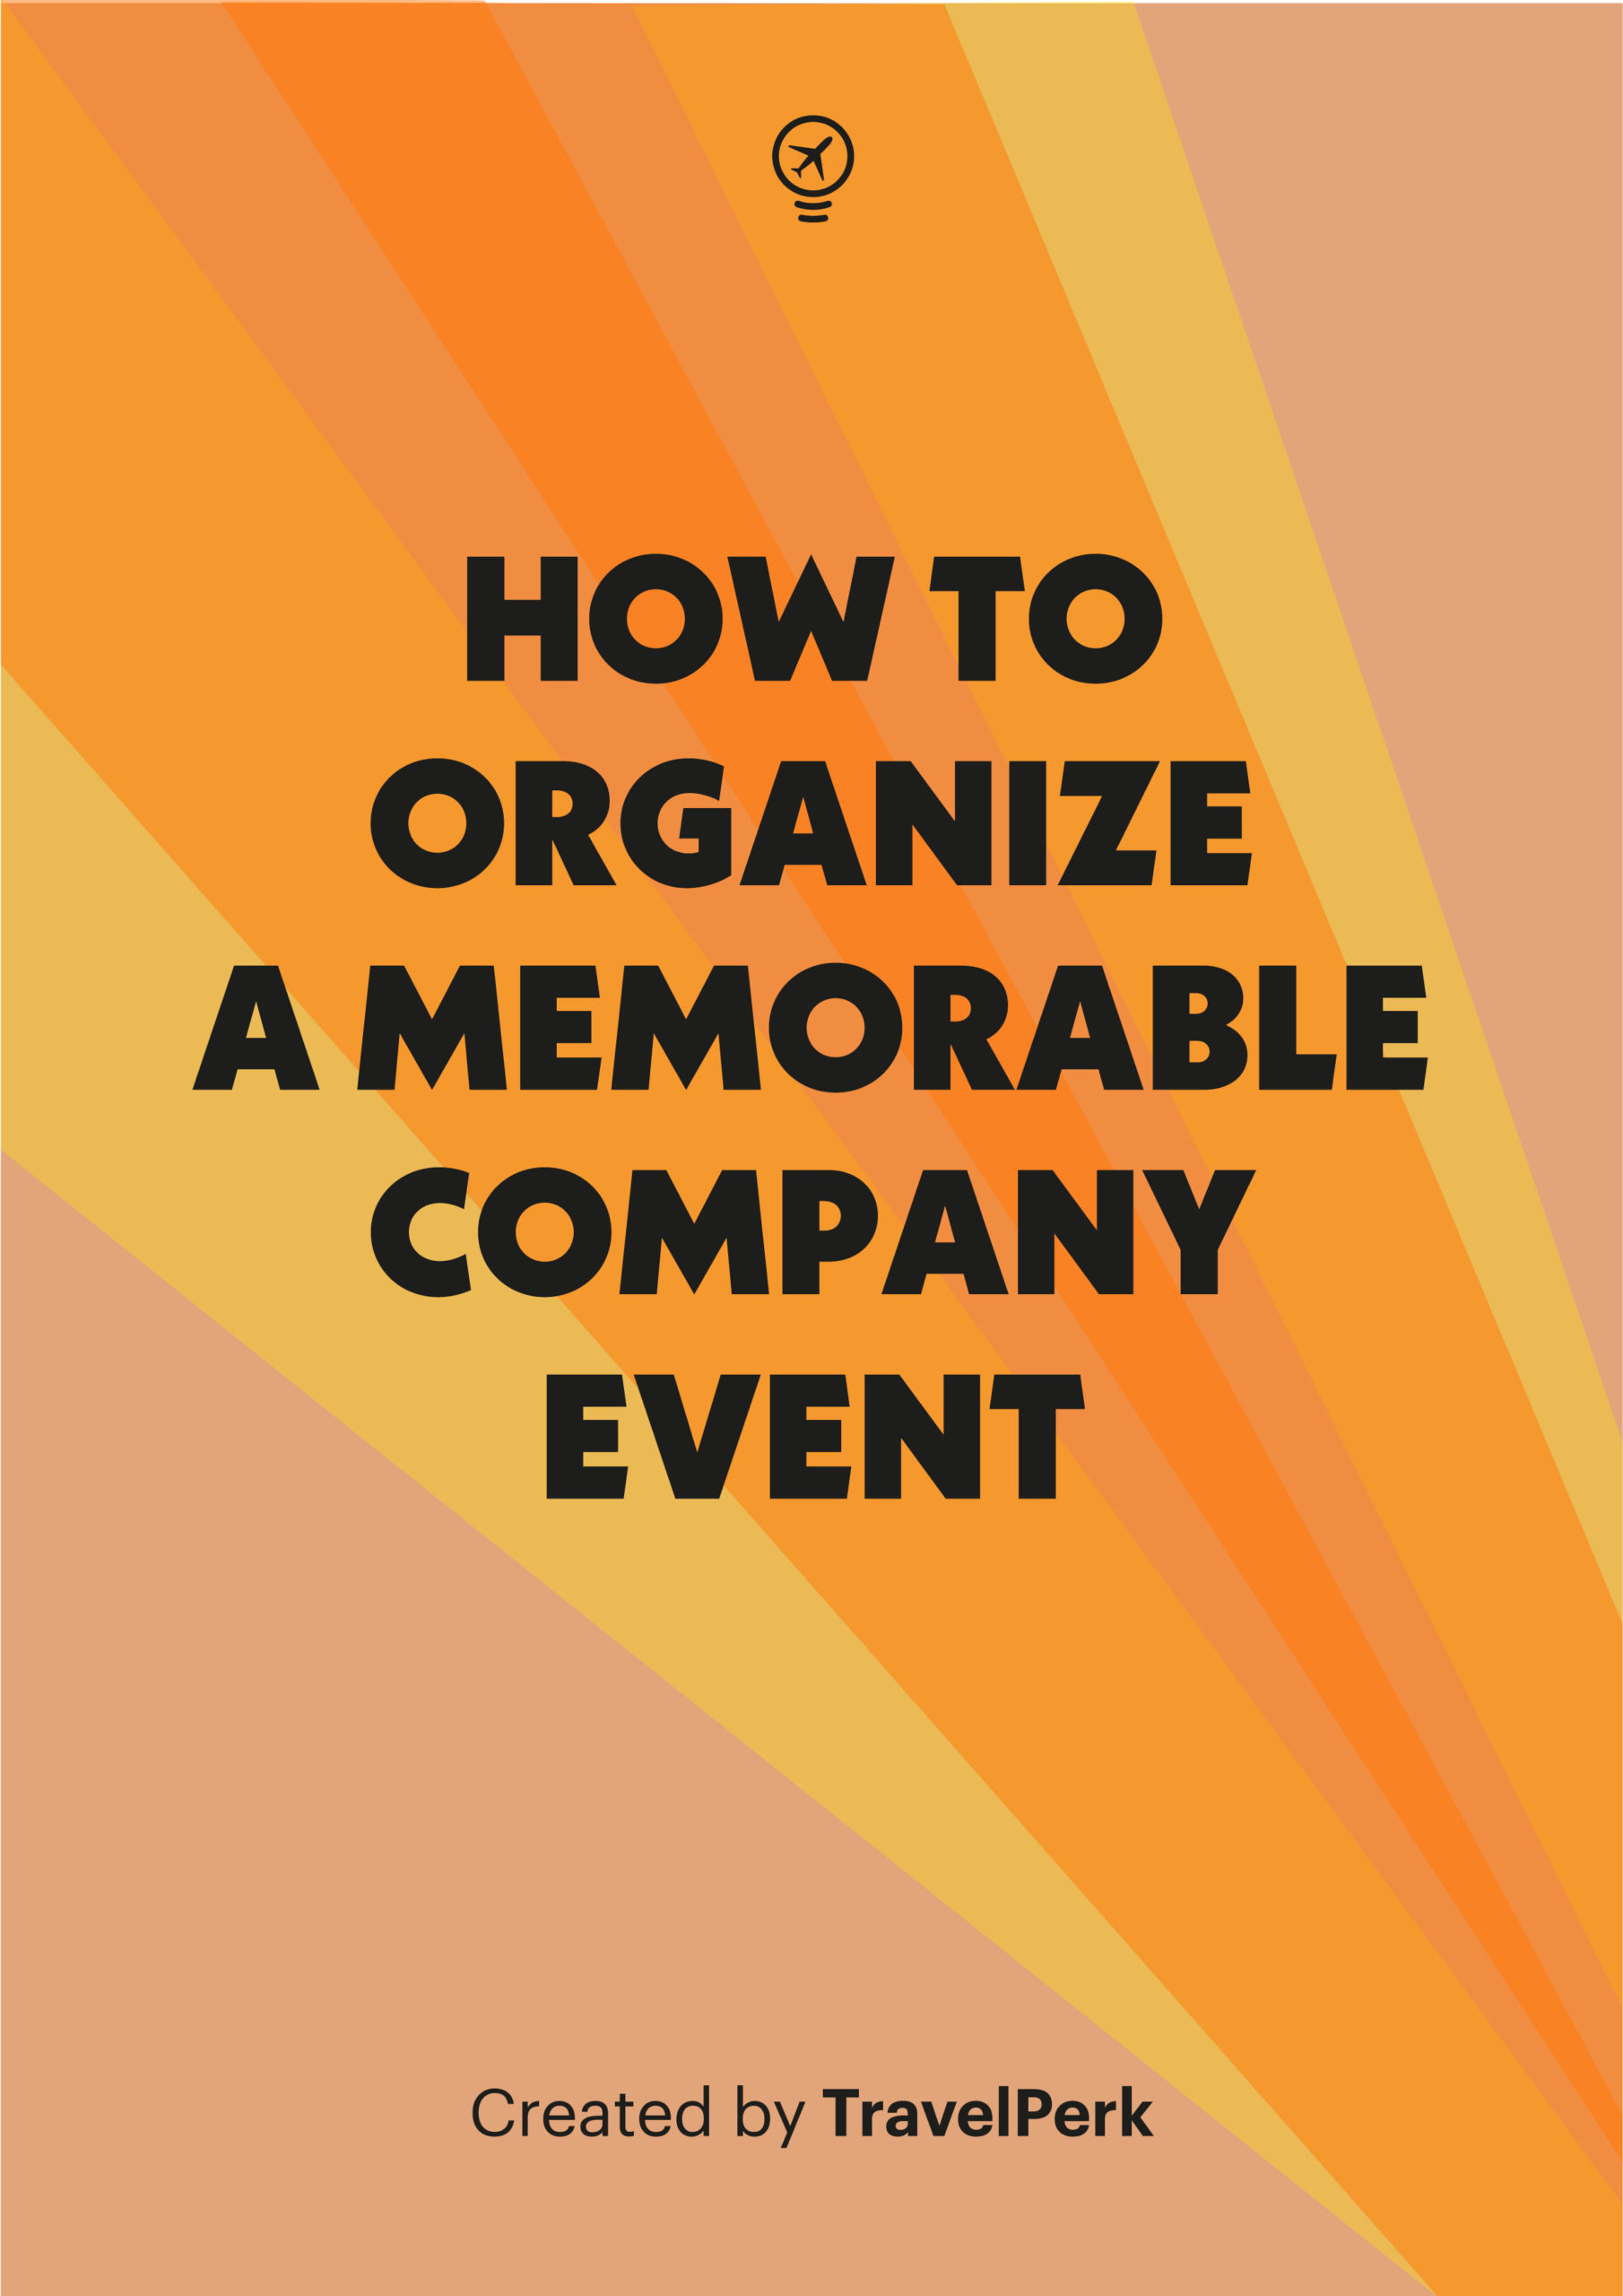 How to organize a memorable company event